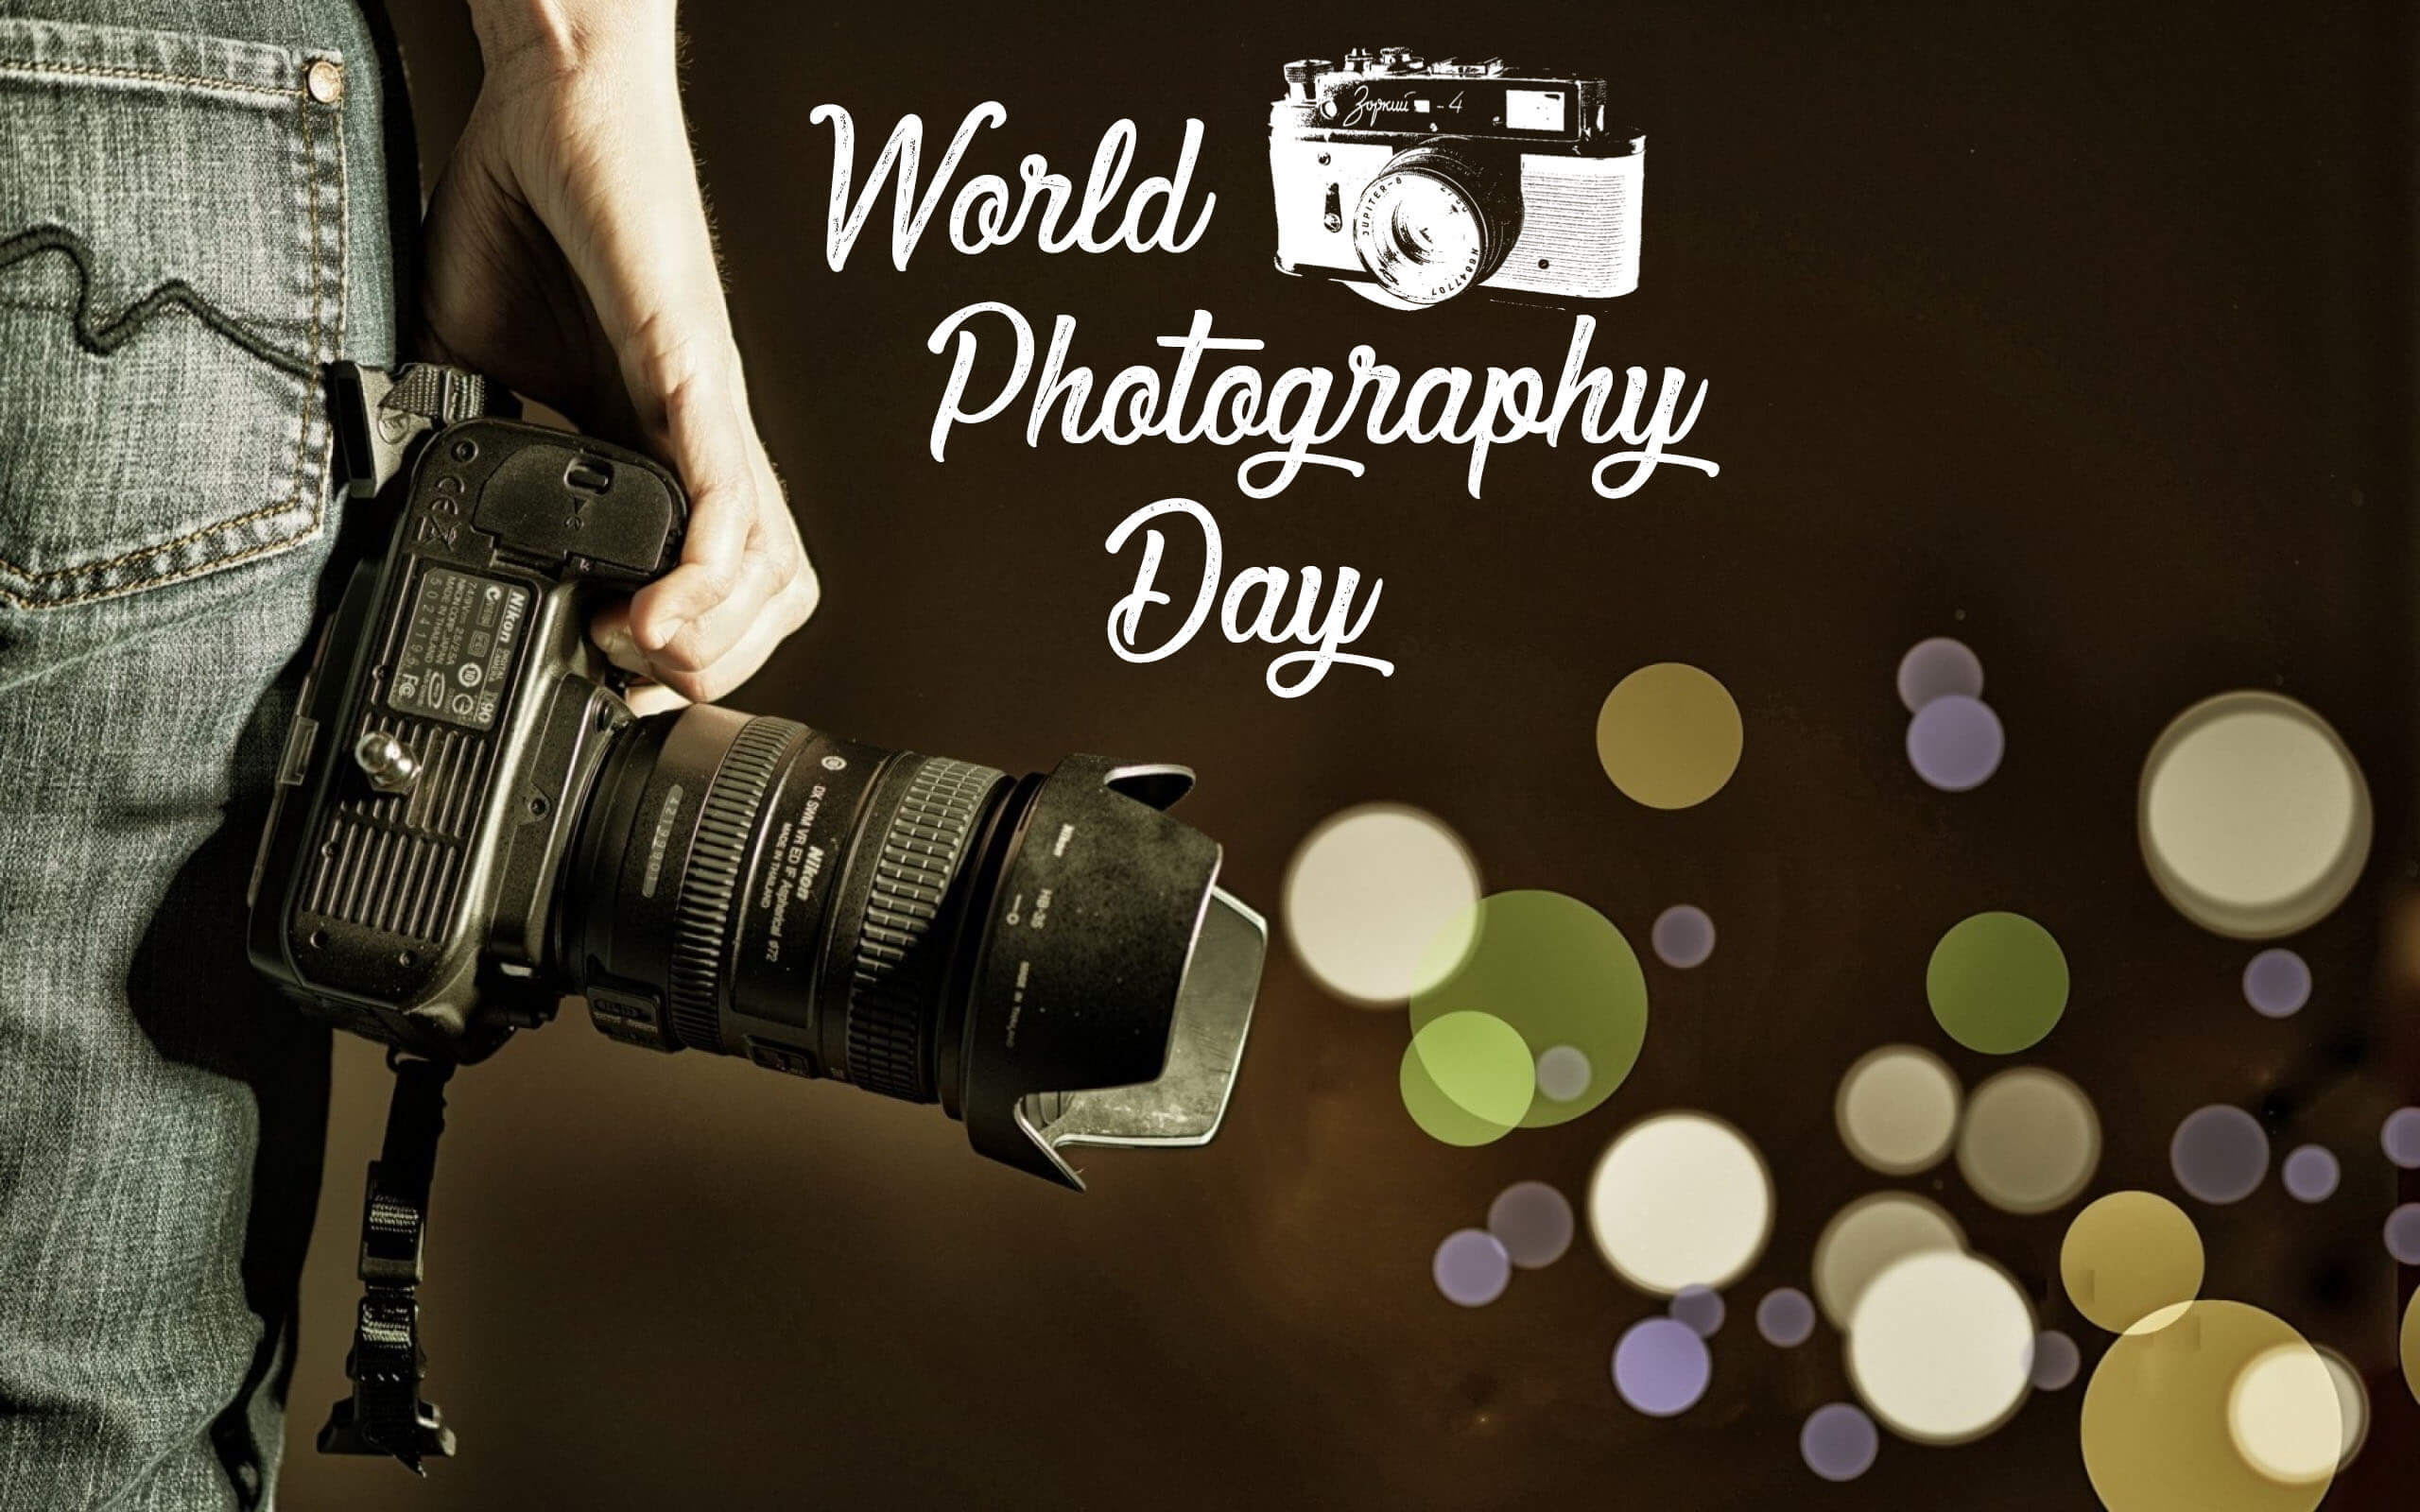 world photography day Images  Prince ilovemysweetheartt on ShareChat